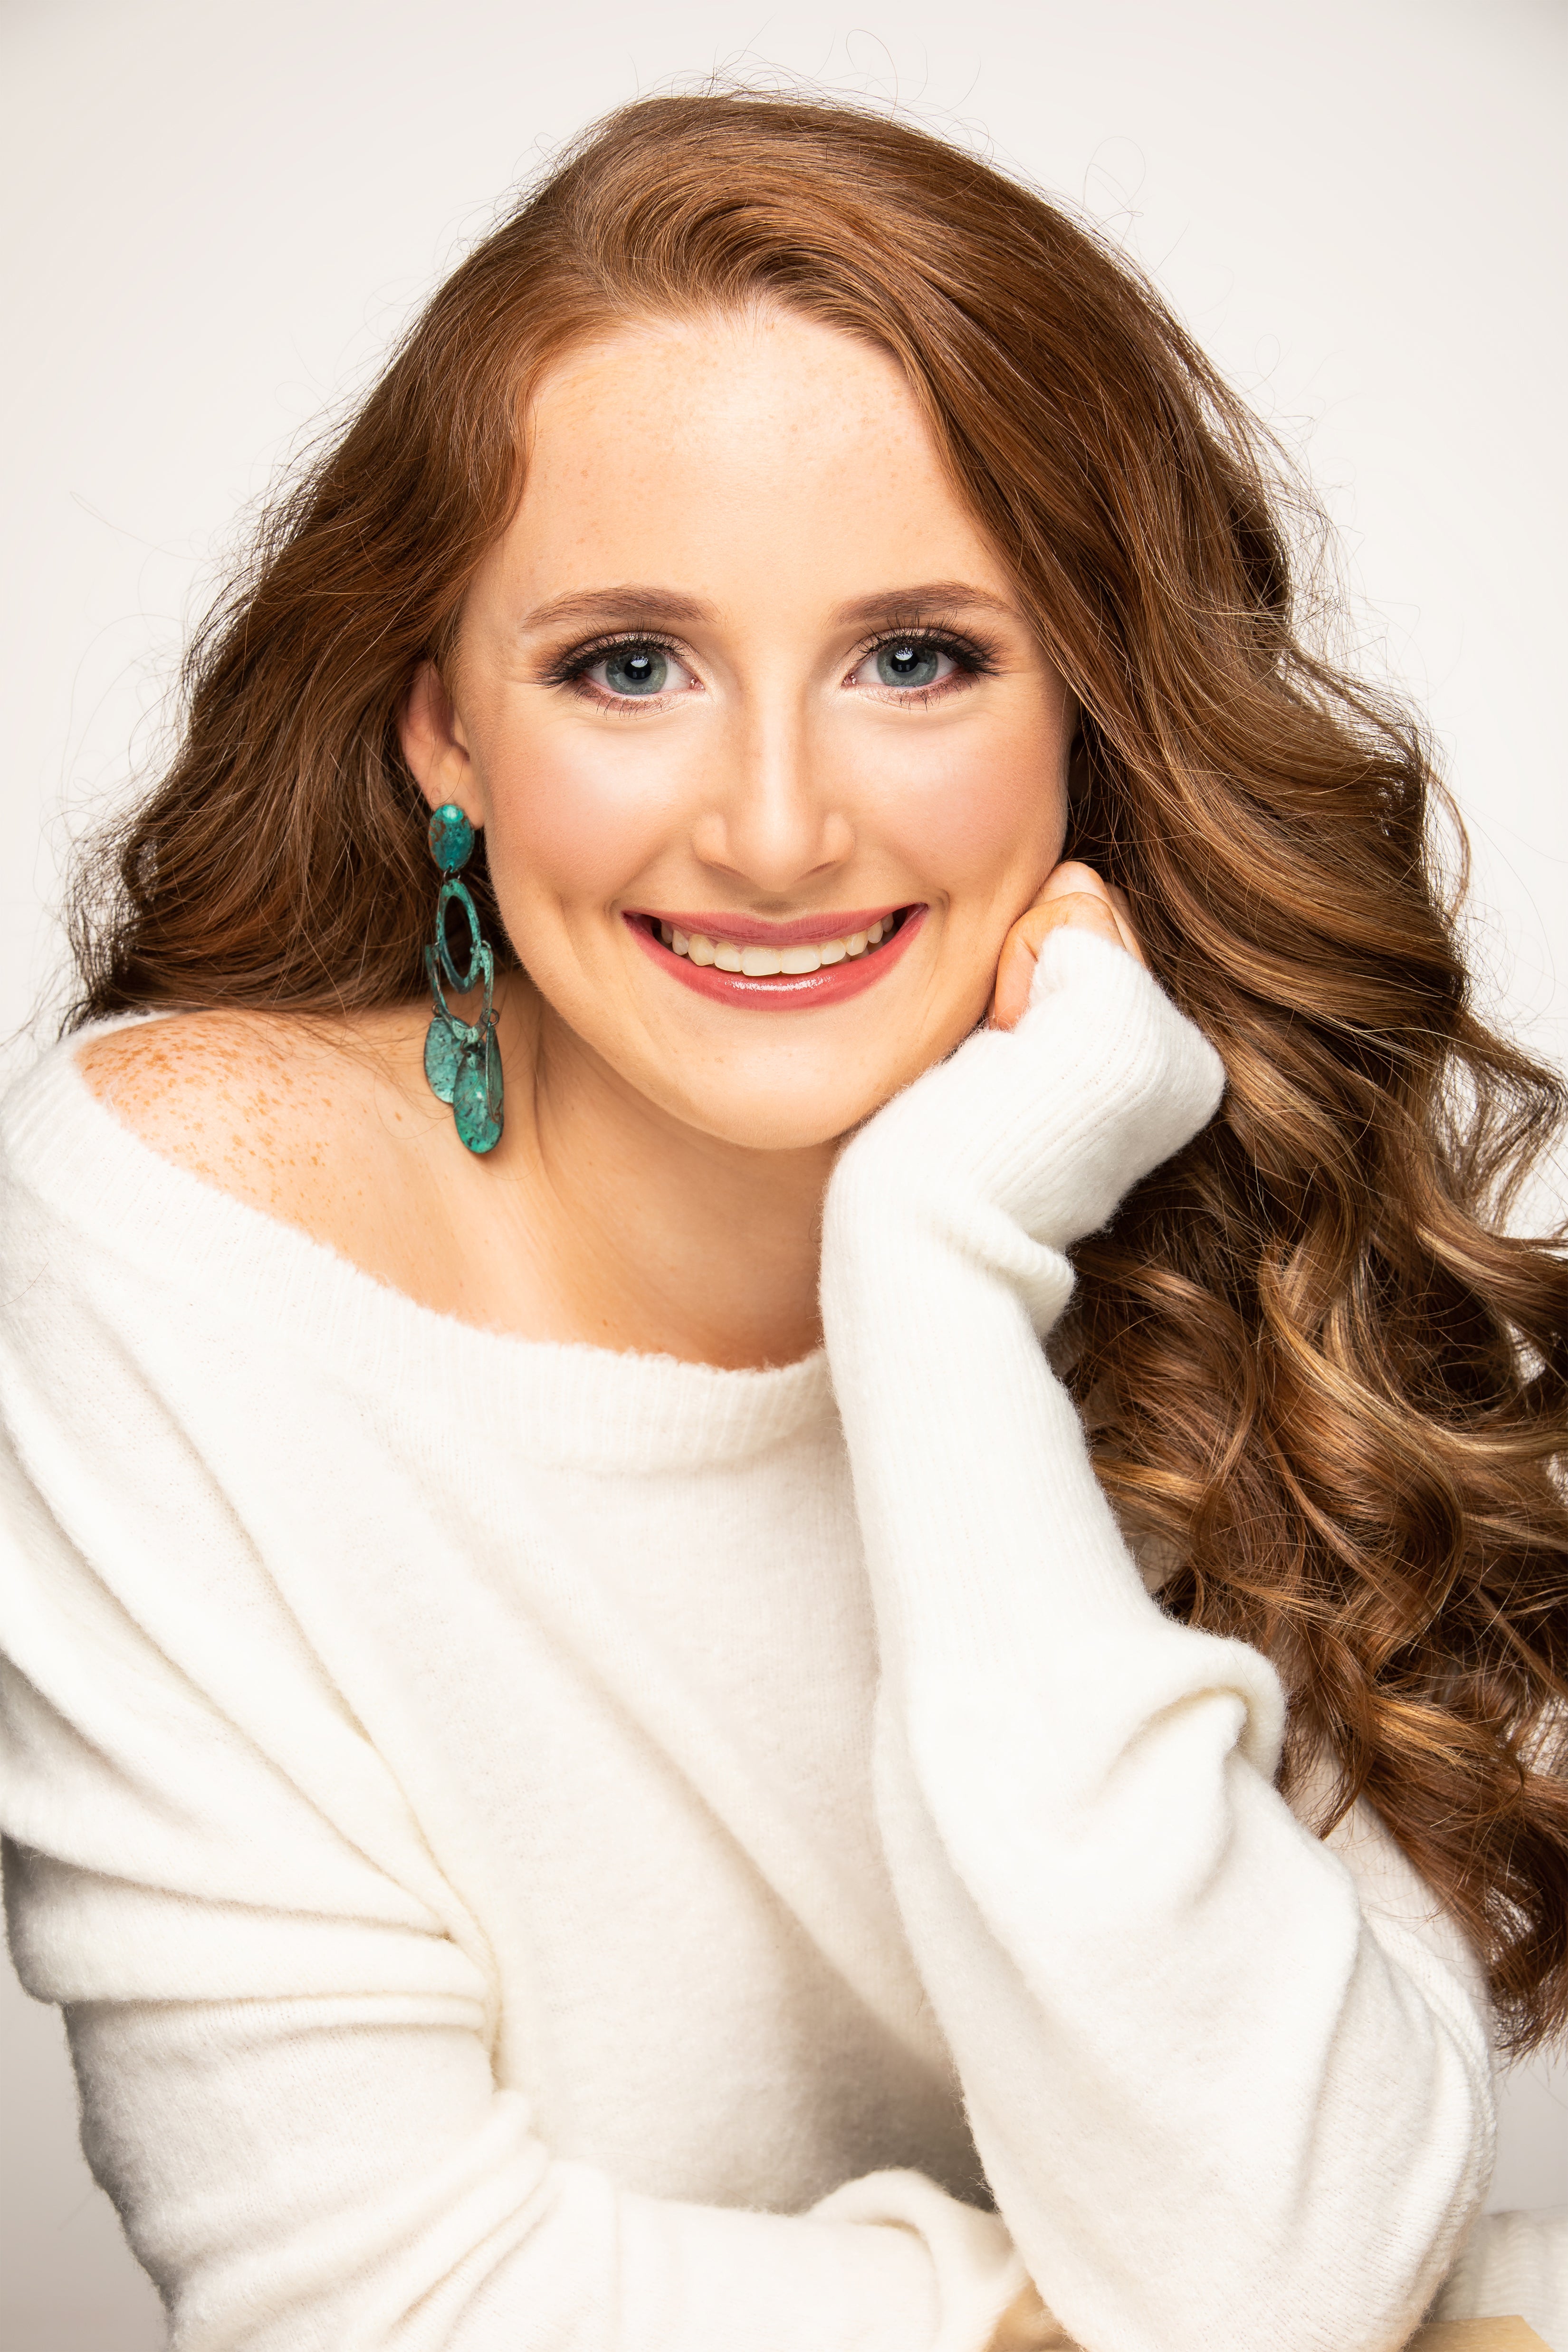 OUTLOOK: Miss Mississippi’s Outstanding Teen to be crowned in Vicksburg – The Vicksburg Post